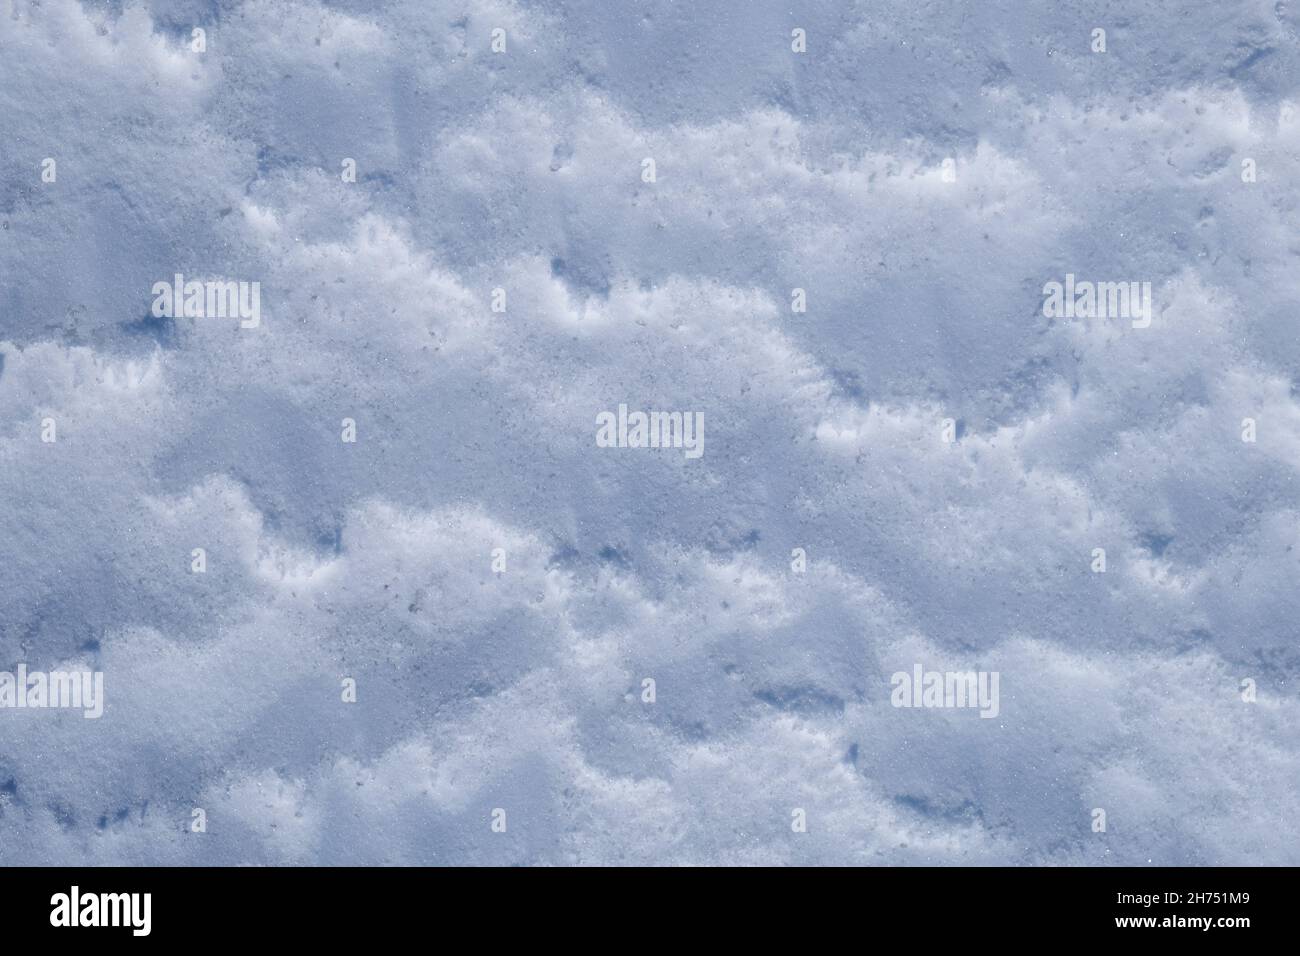 Texture of winter snow surface. Blue natural snow background with drawings made by the wind. Stock Photo